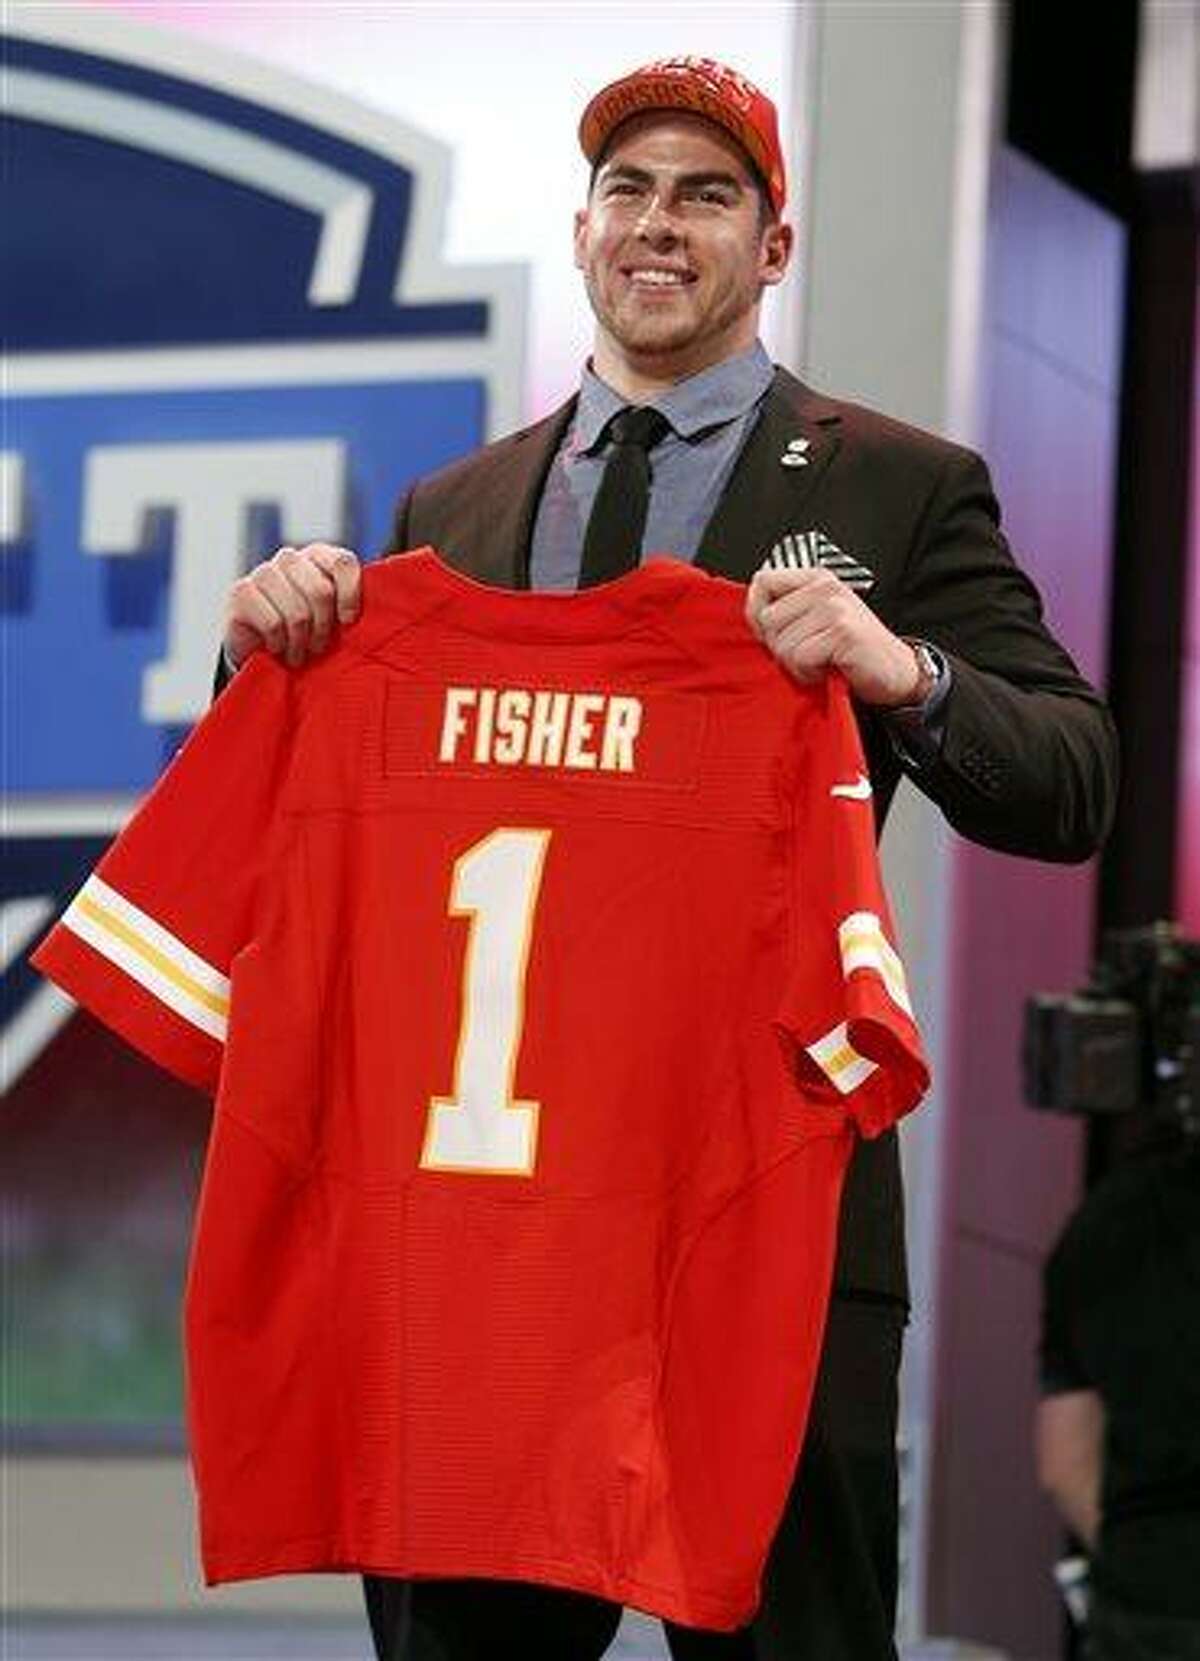 Tackle Eric Fisher from Central Michigan holds up the team jersey after being selected first overall by the Kansas City Chiefs in the first round of the NFL football draft, Thursday, April 25, 2013 at Radio City Music Hall in New York. (AP Photo/Jason DeCrow)